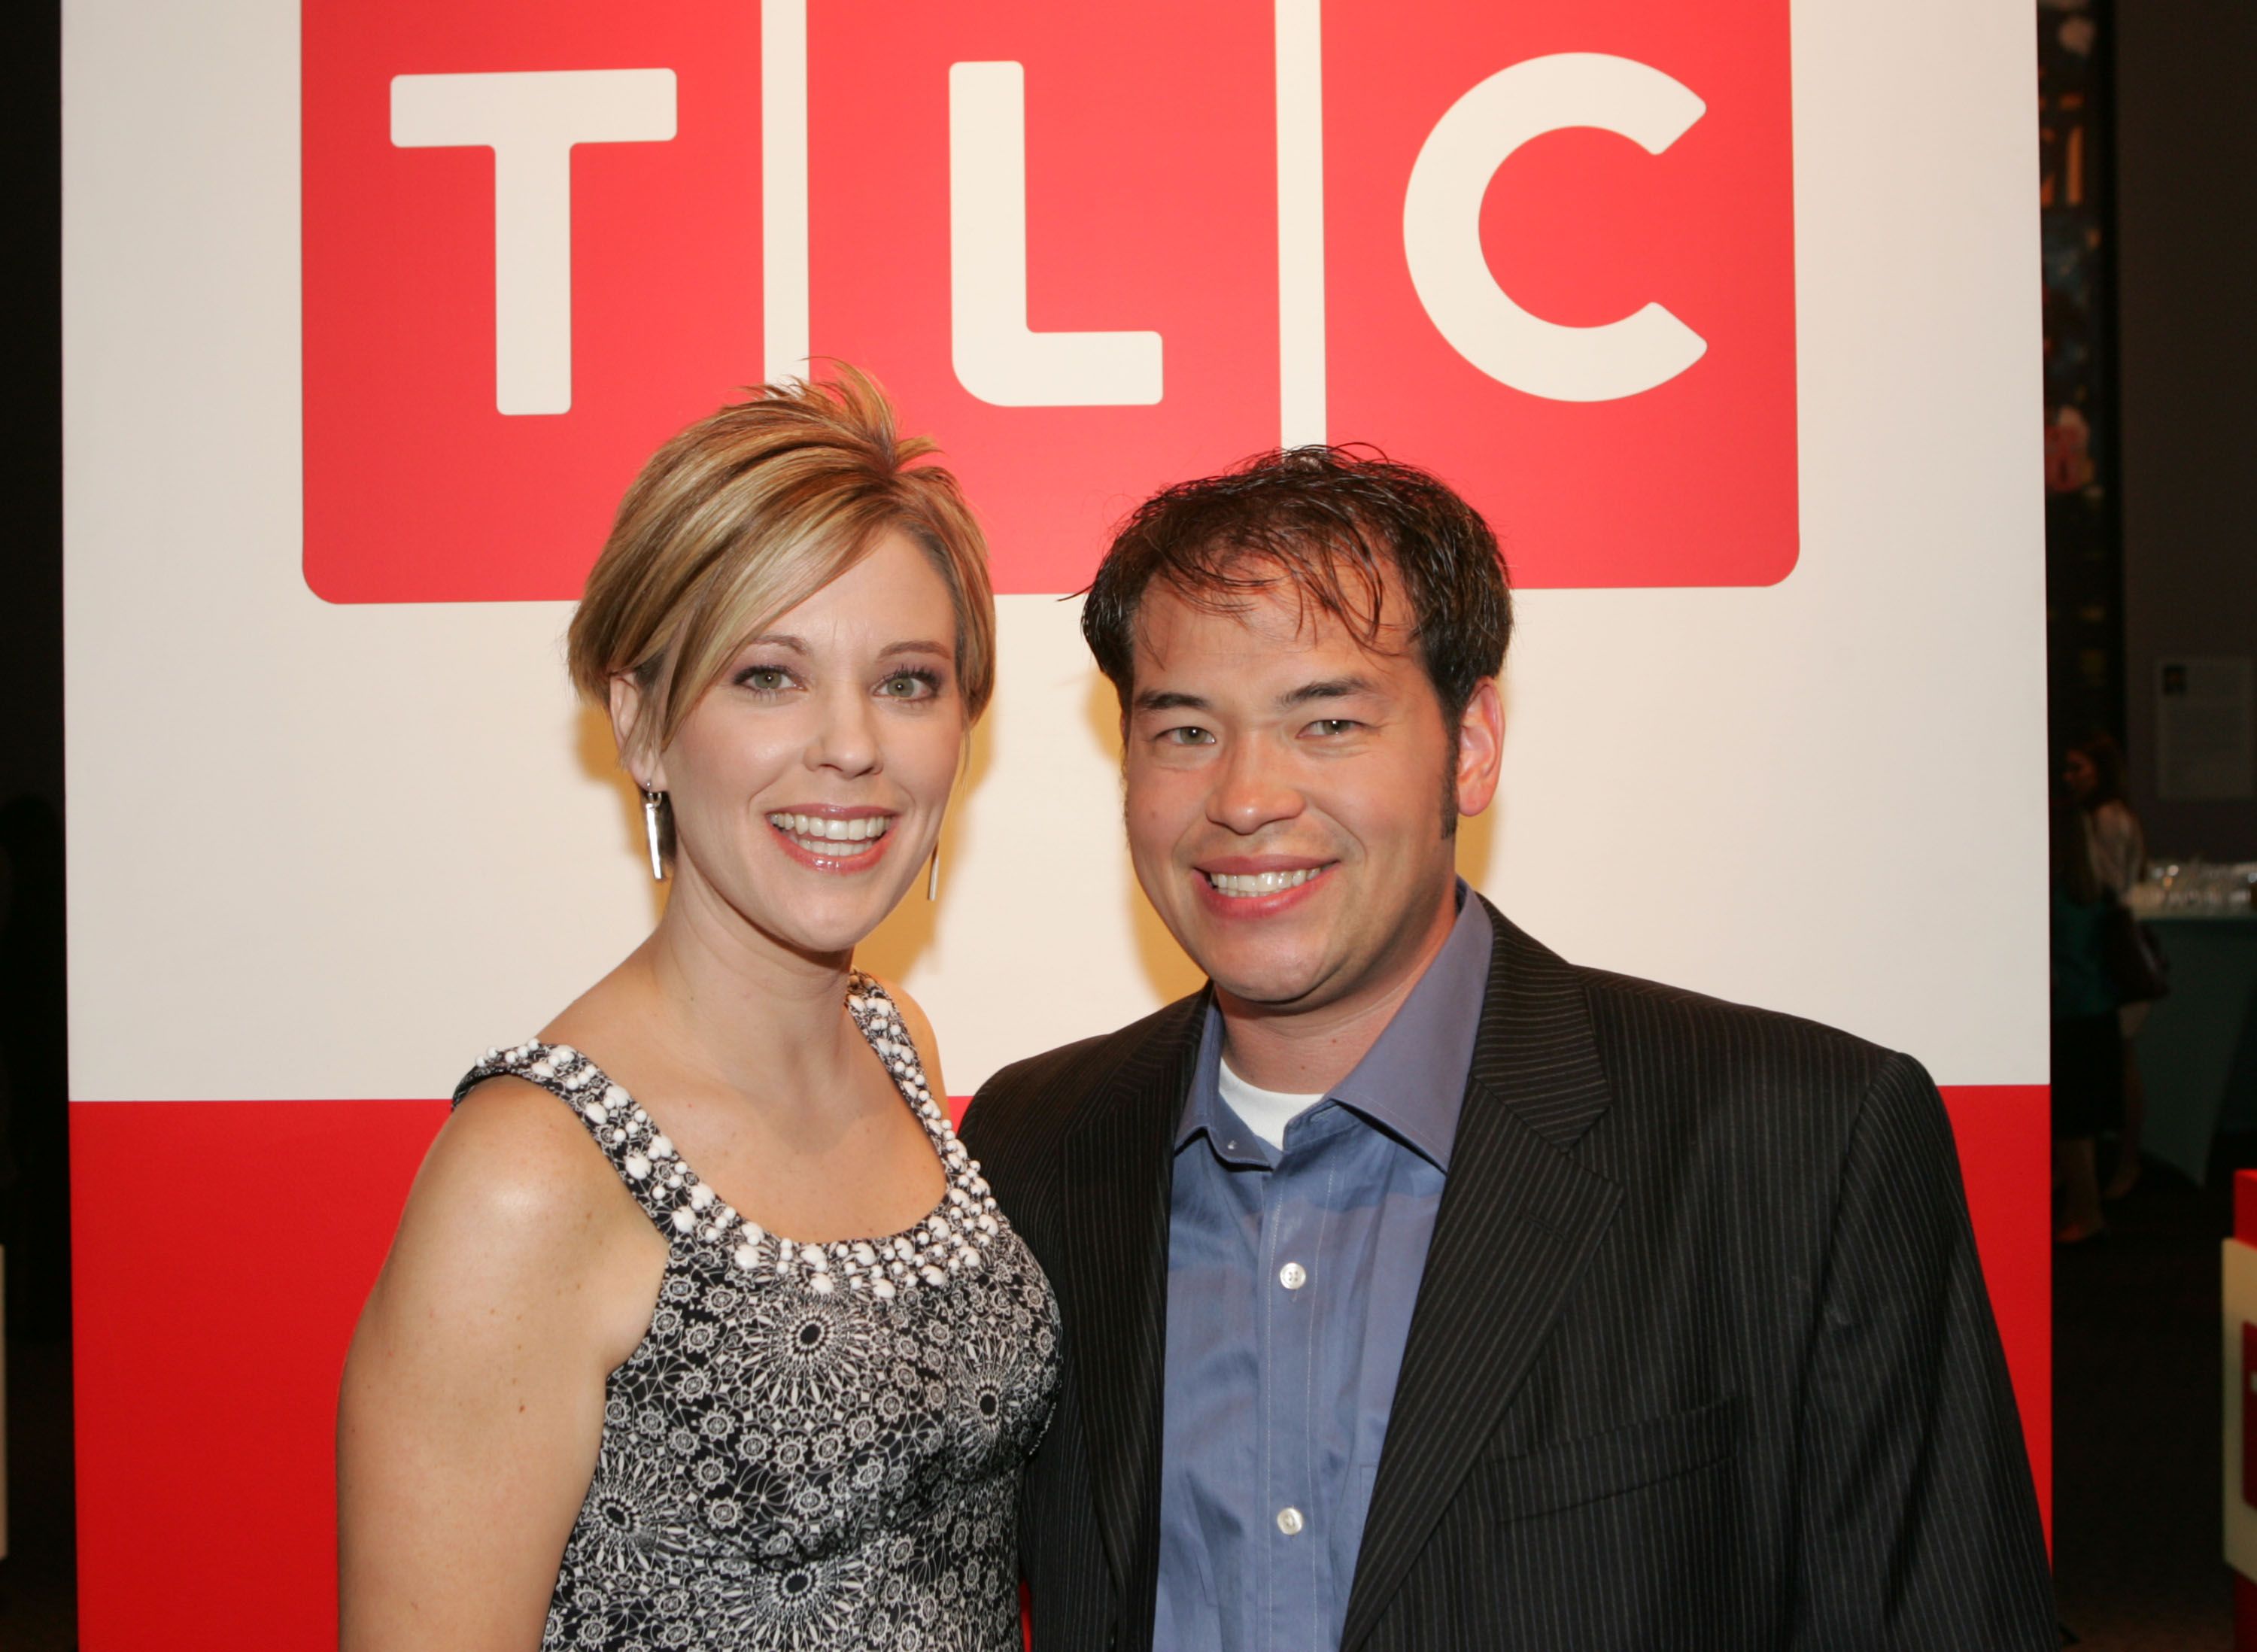 John and Kate Gosselin at the Discovery Upfront Presentation NY - Talent Images at the Frederick P. Rose Hall on April 23, 2008 | Photo: Getty Images